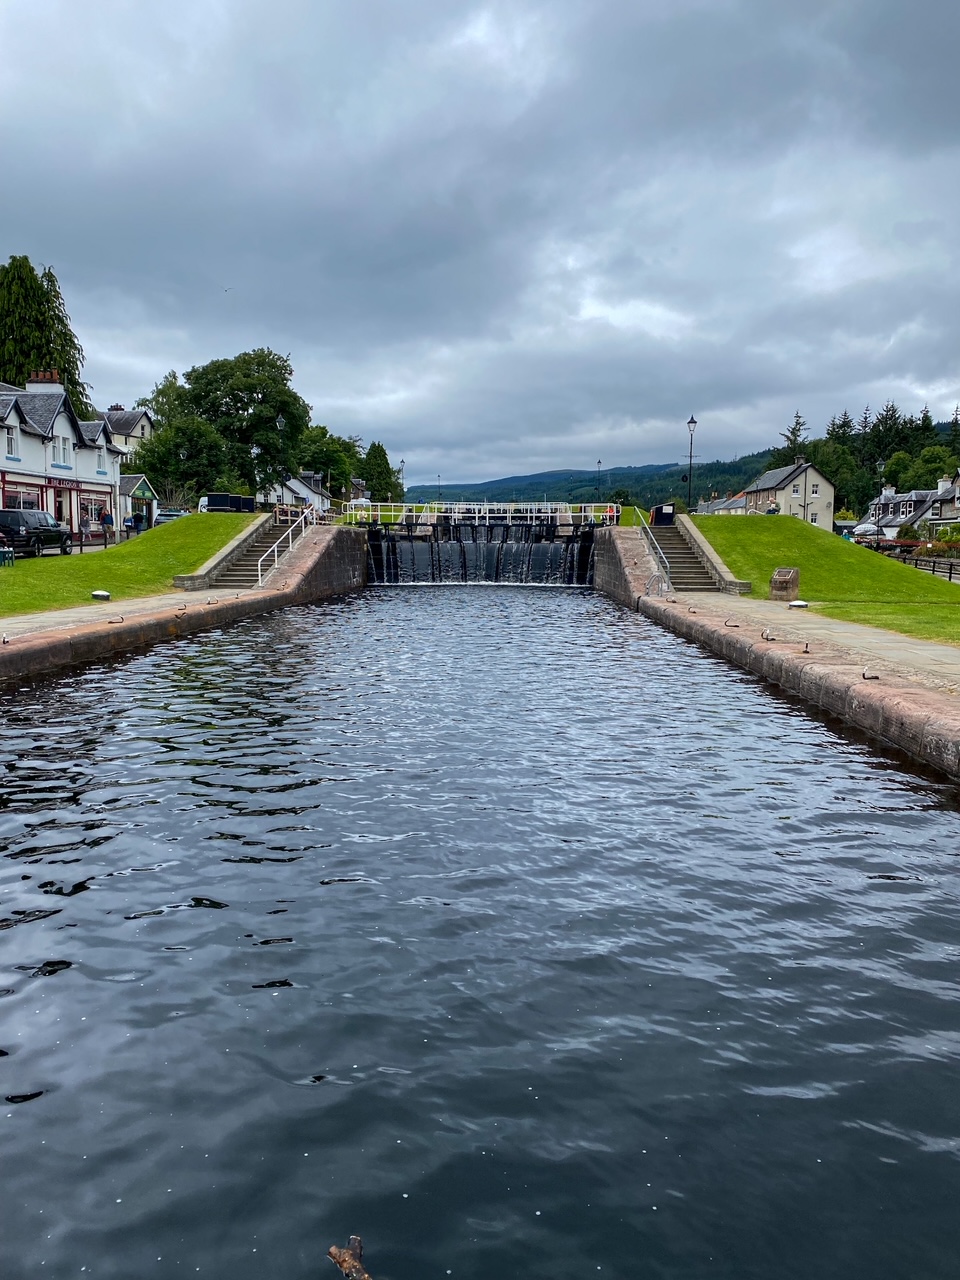 Fort Augustus, the third stop on our day trip from Edinburgh to Glencoe, Loch Ness and the Highlands